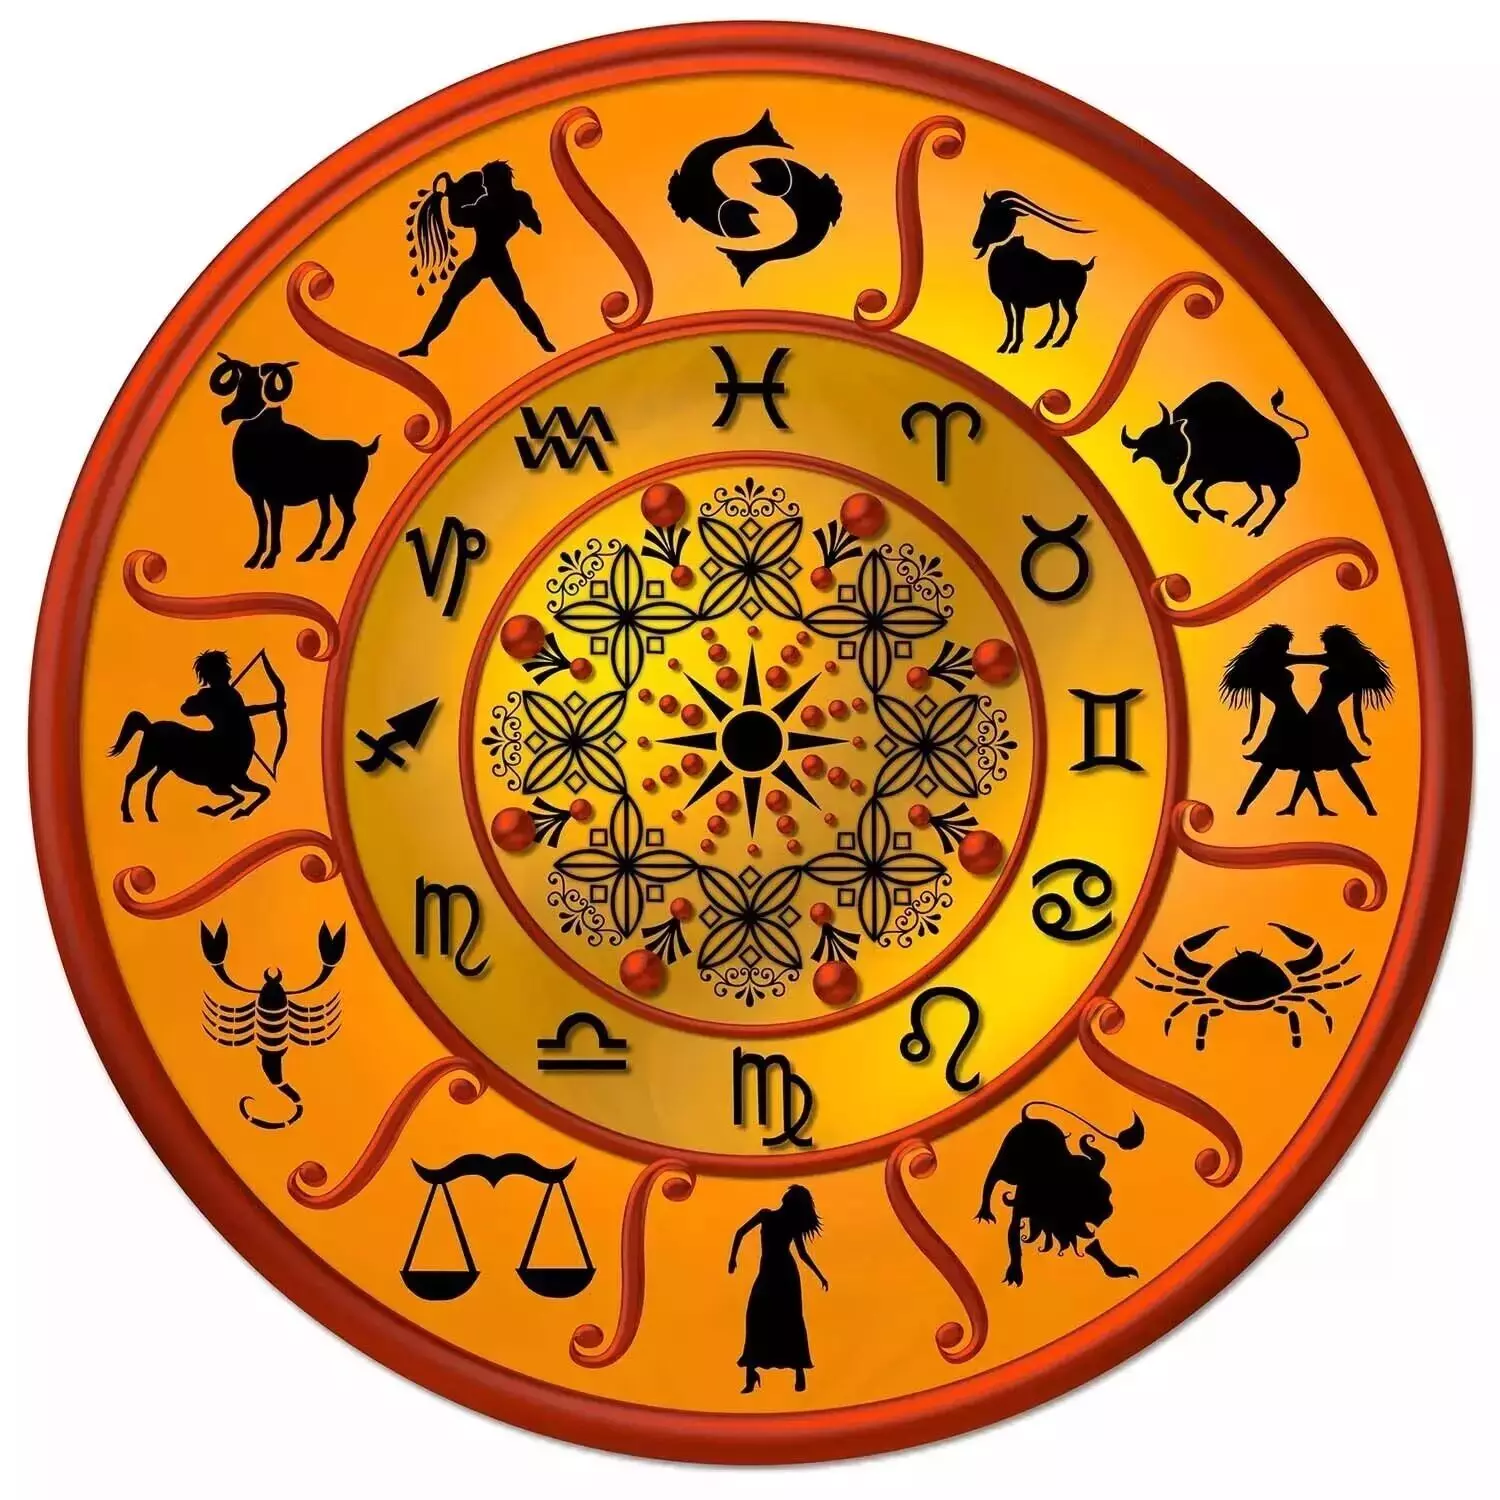 06 July  – Know your todays horoscope